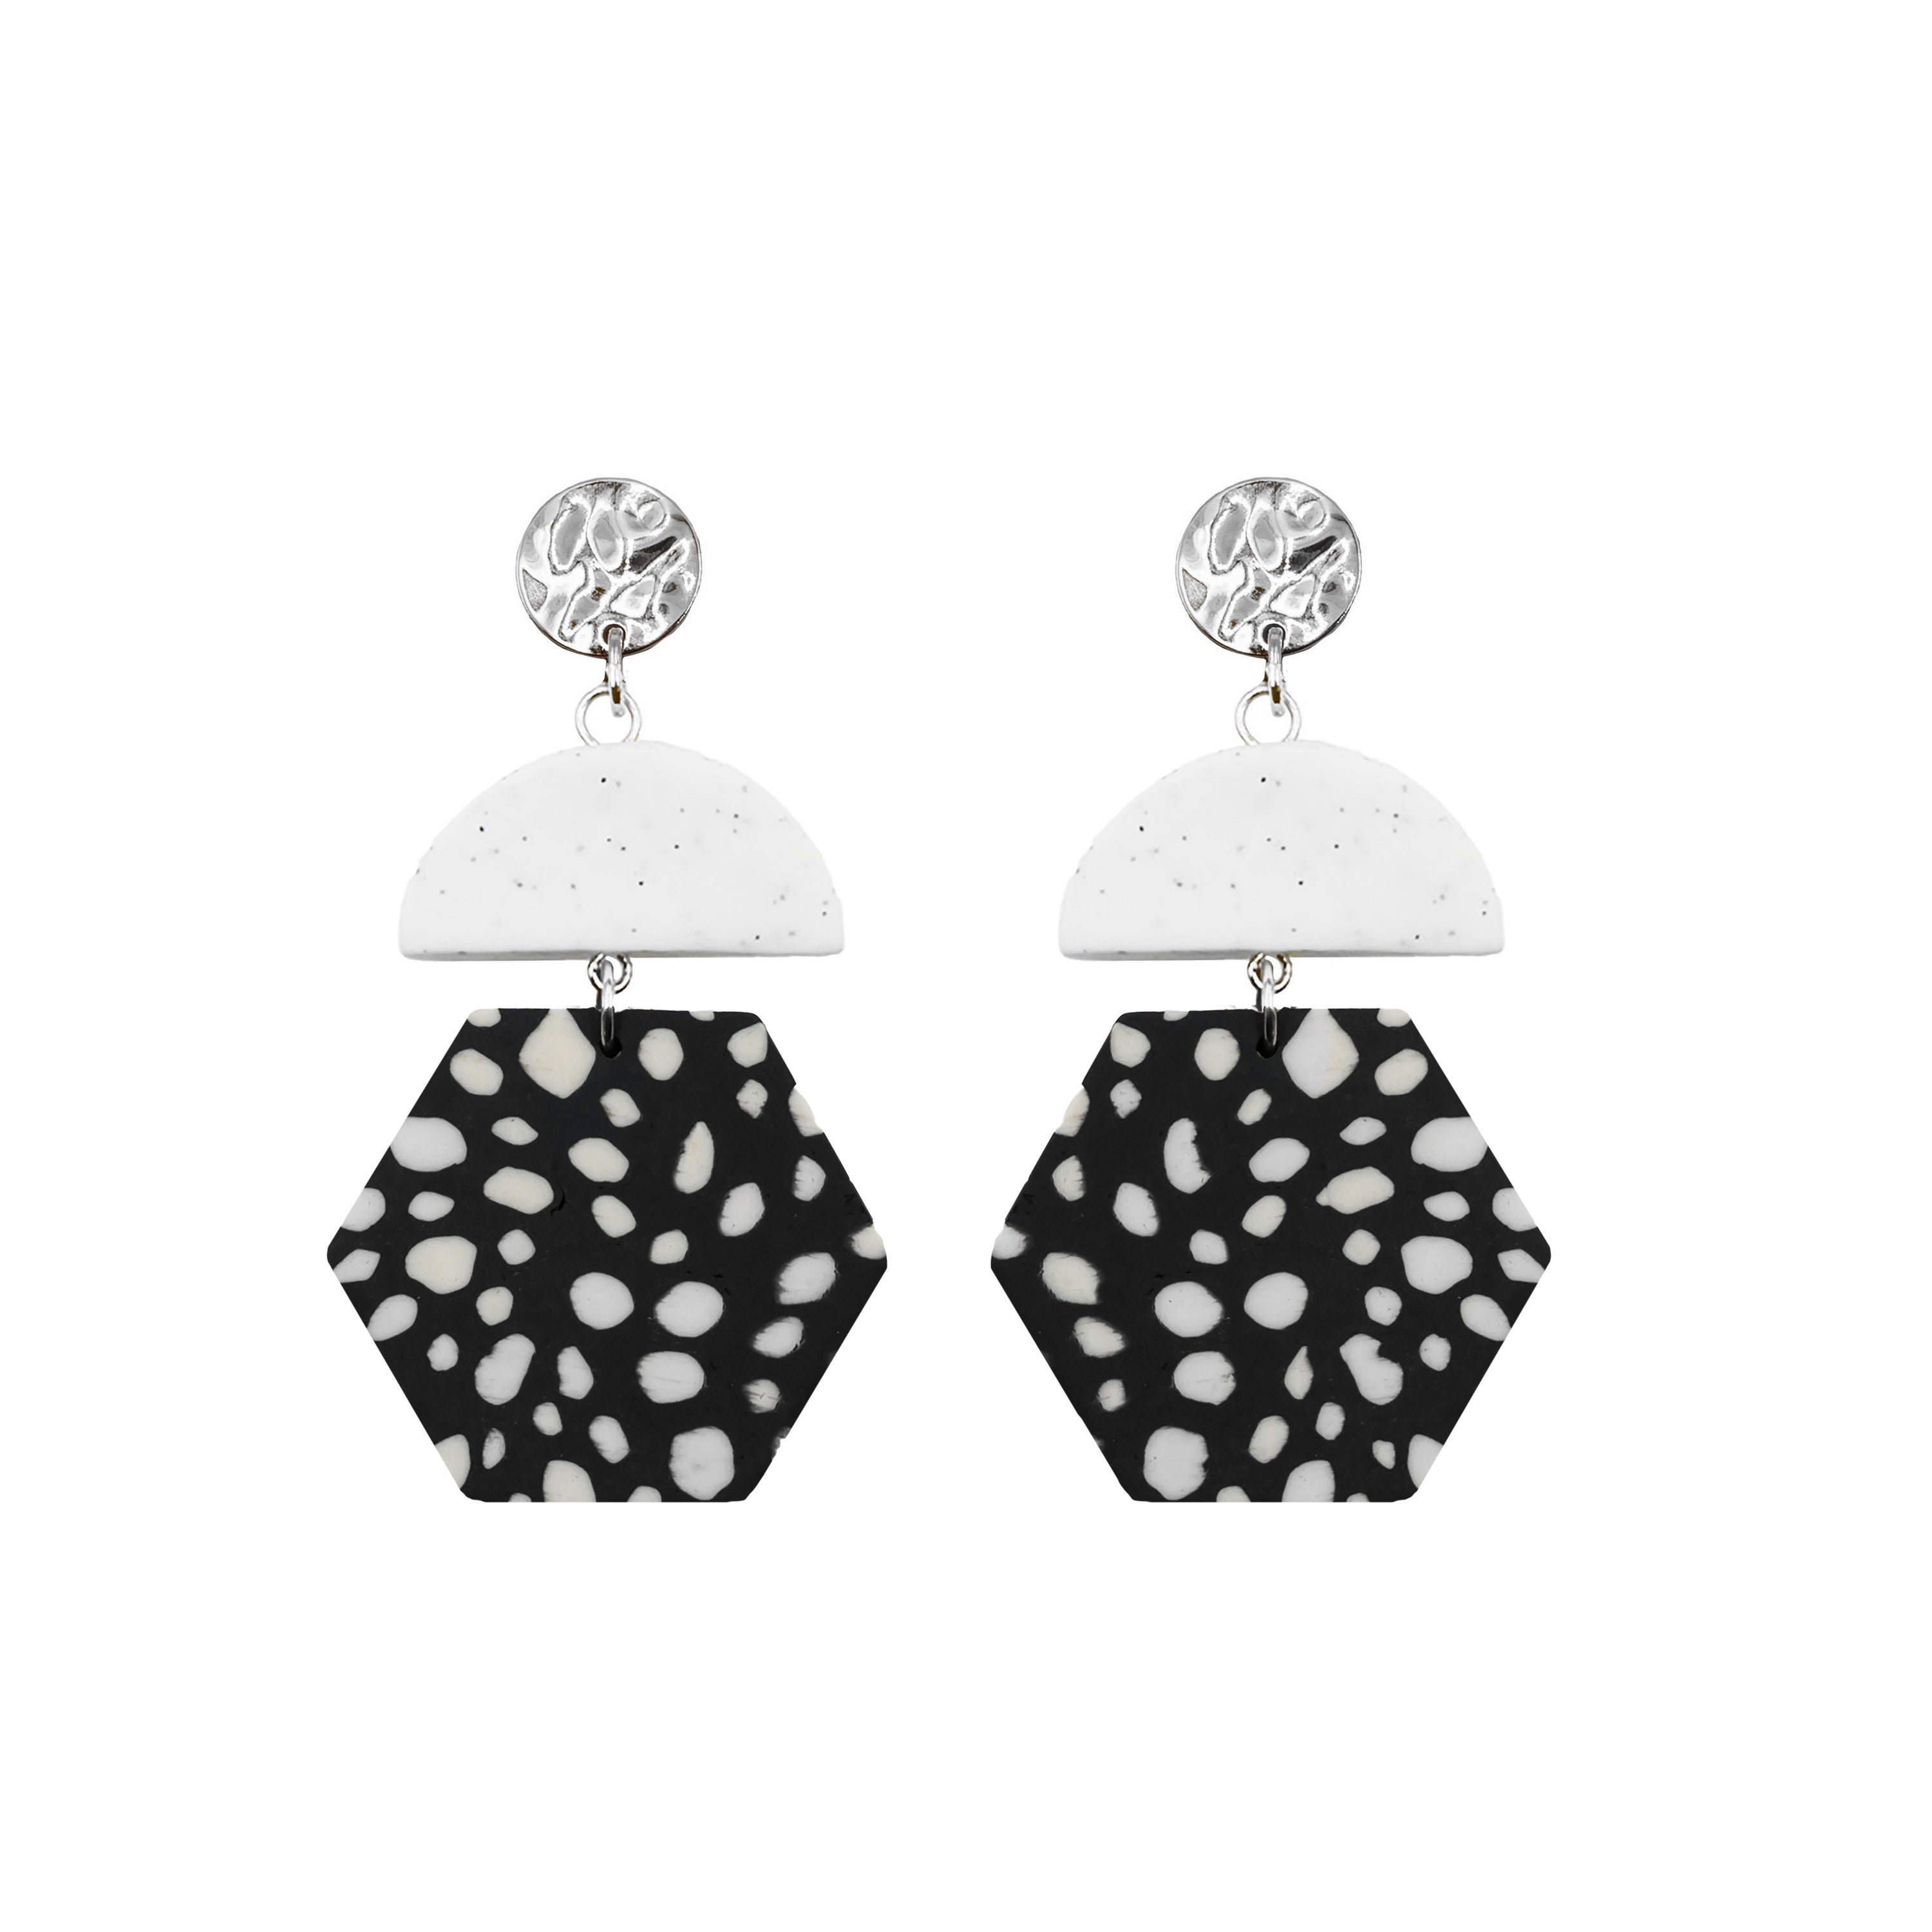 Bonita Collection - Silver Jane Earrings fine designer jewelry for men and women